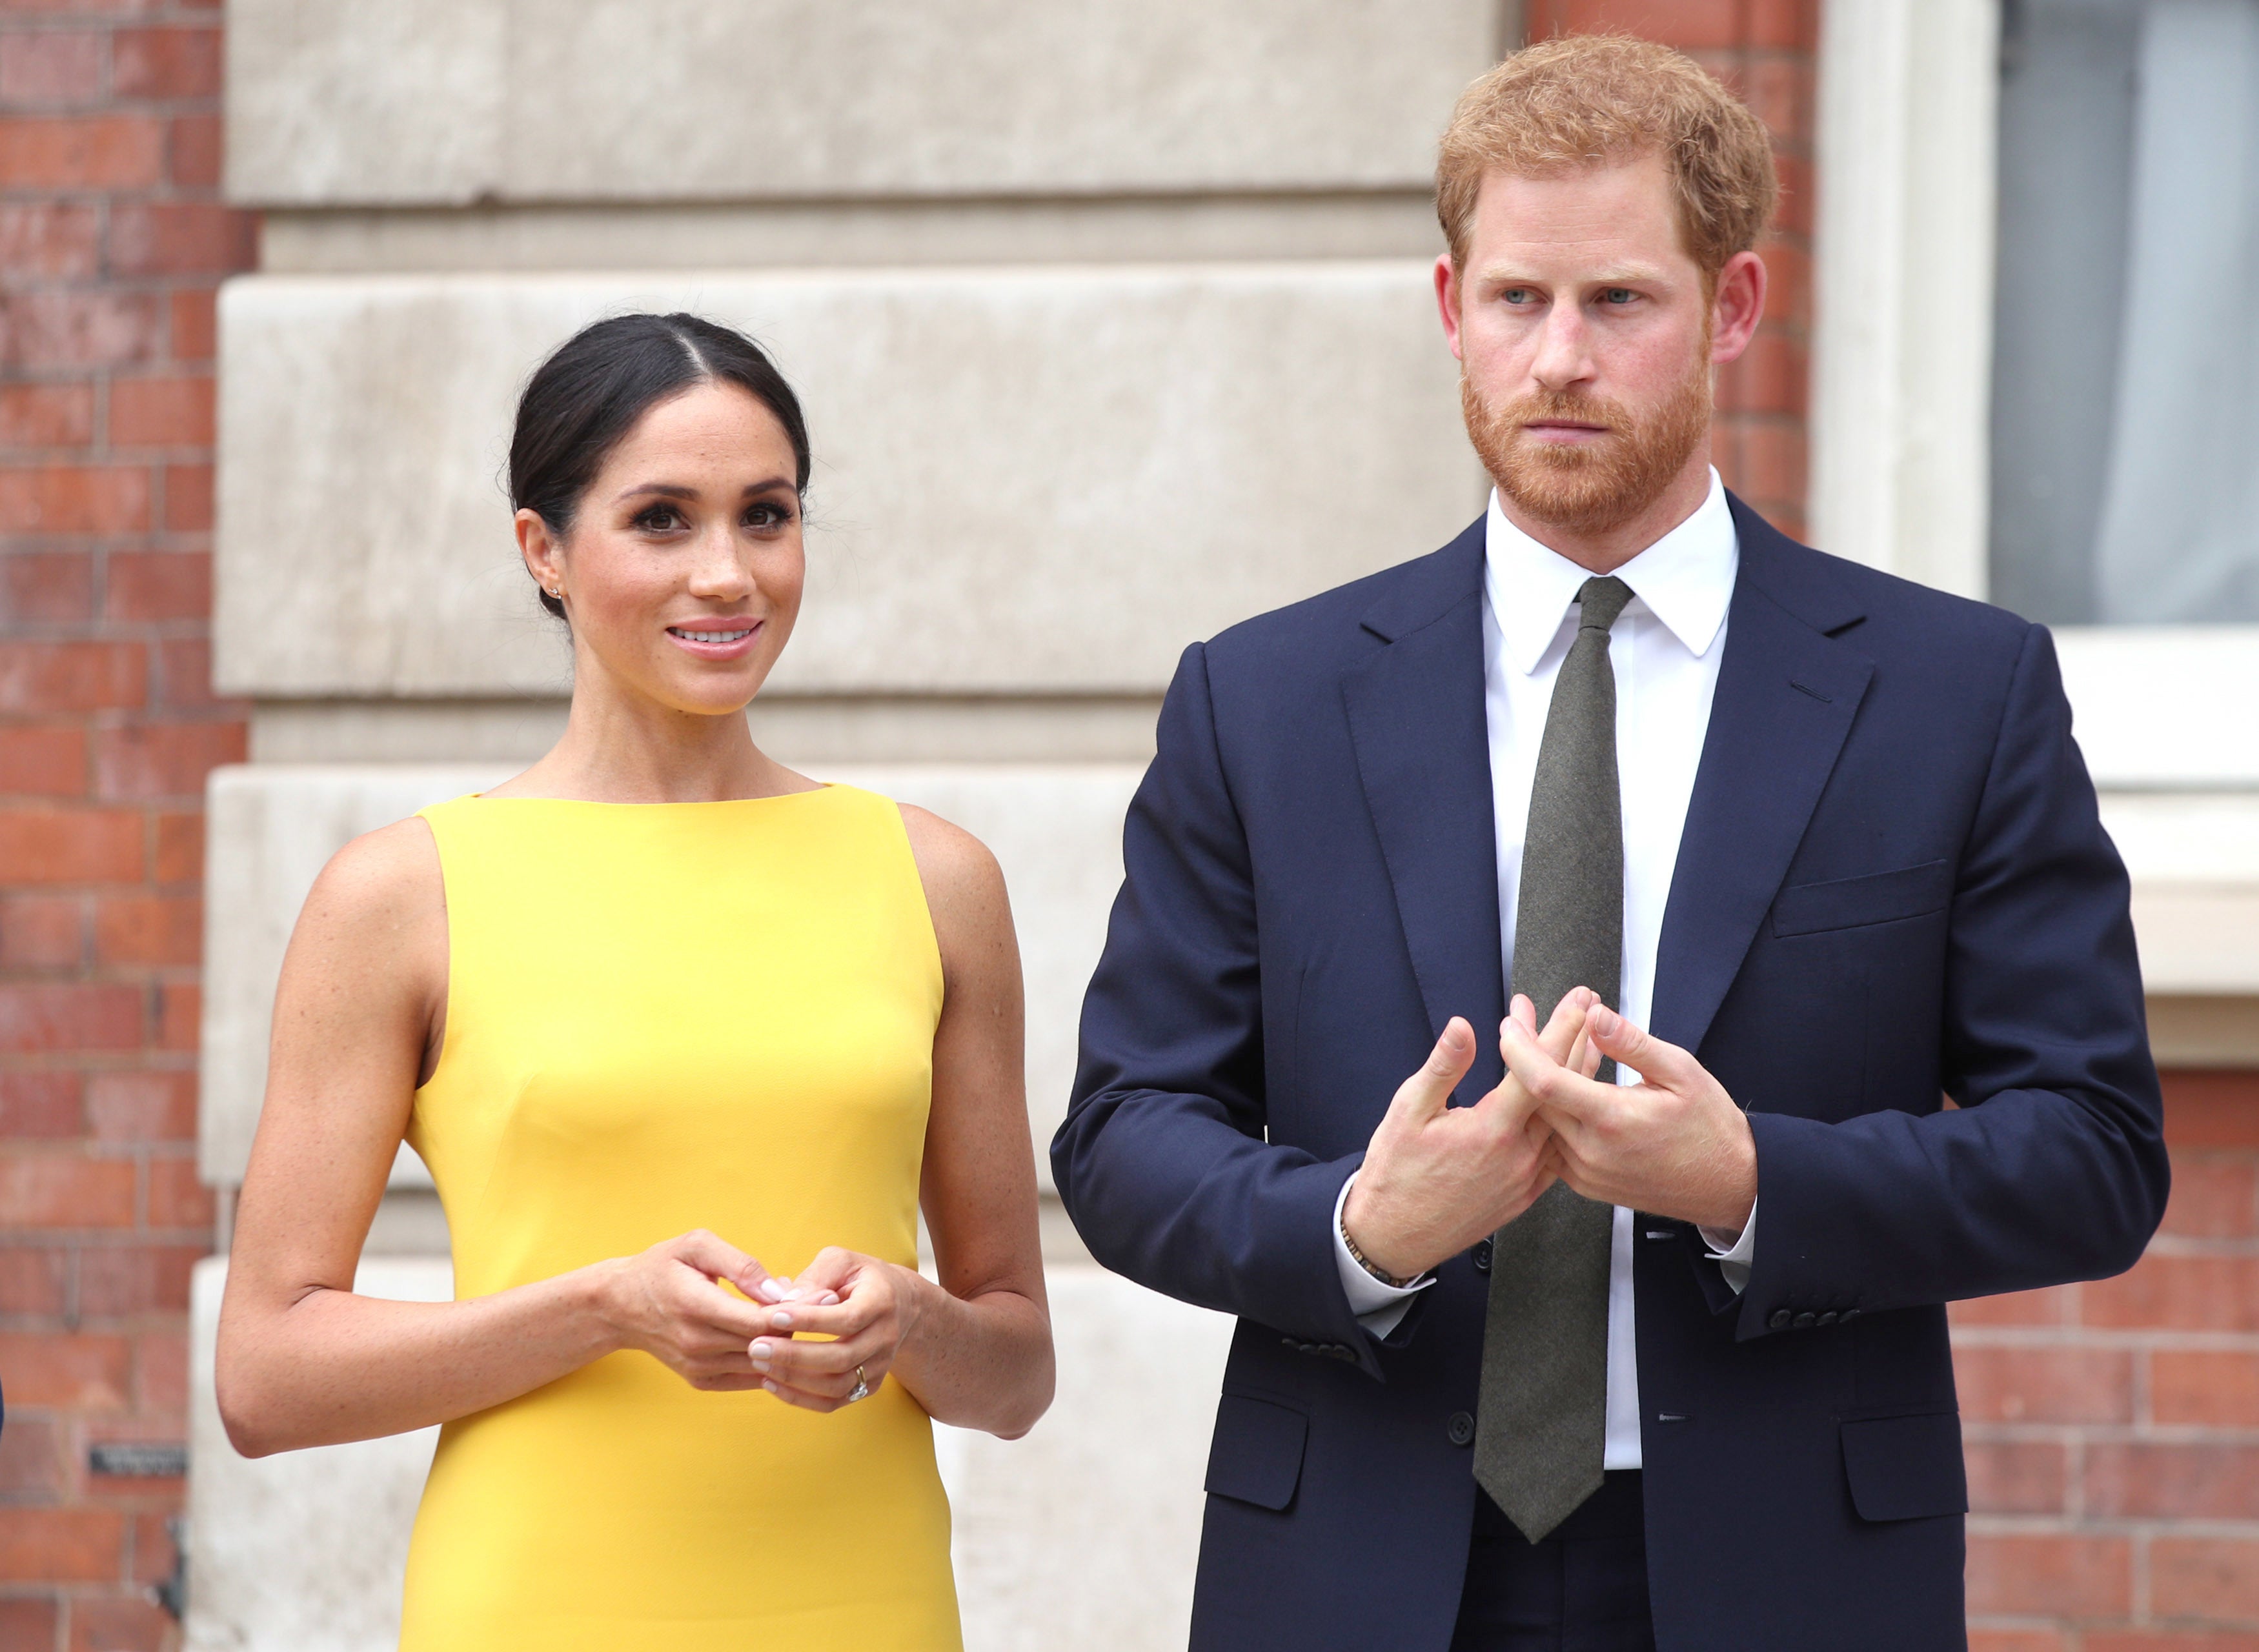 The Duke and Duchess of Sussex are the latest high-profile content creators to take issue with Spotify hosting Joe Rogan. (Yui Mok/PA)